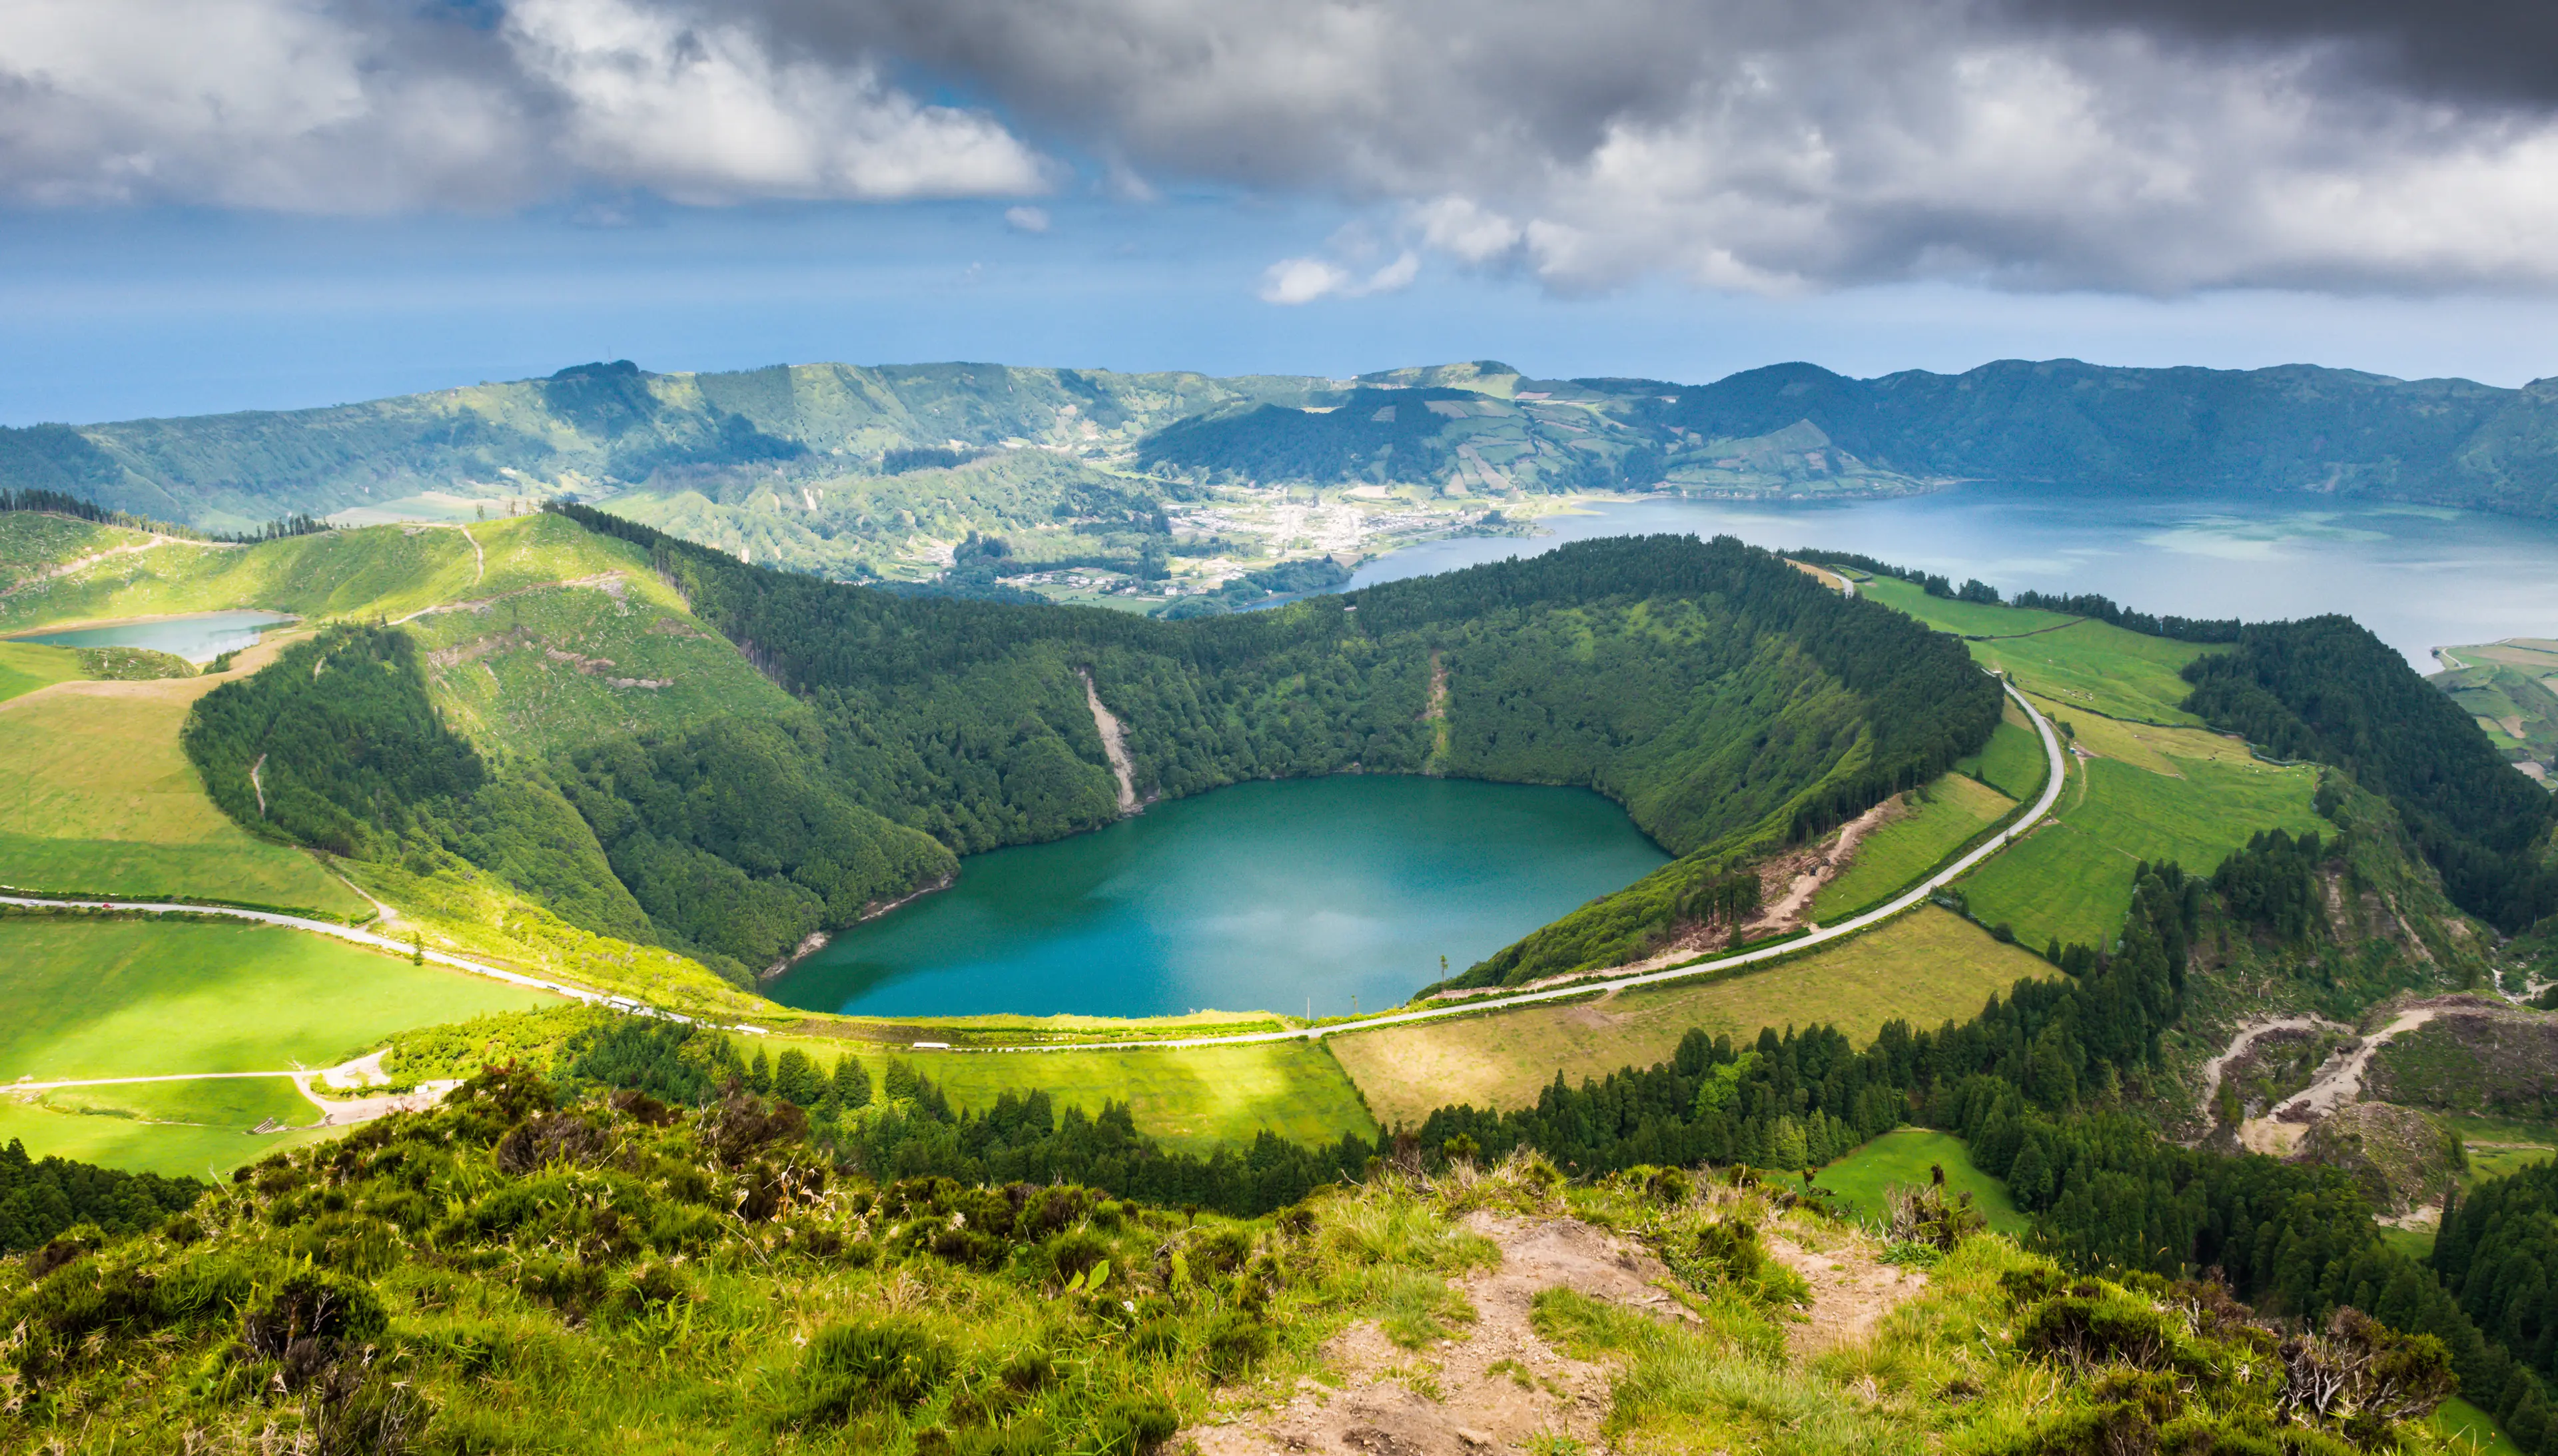 2-Day Azores Adventure: Sightseeing and Culinary Delights with Friends